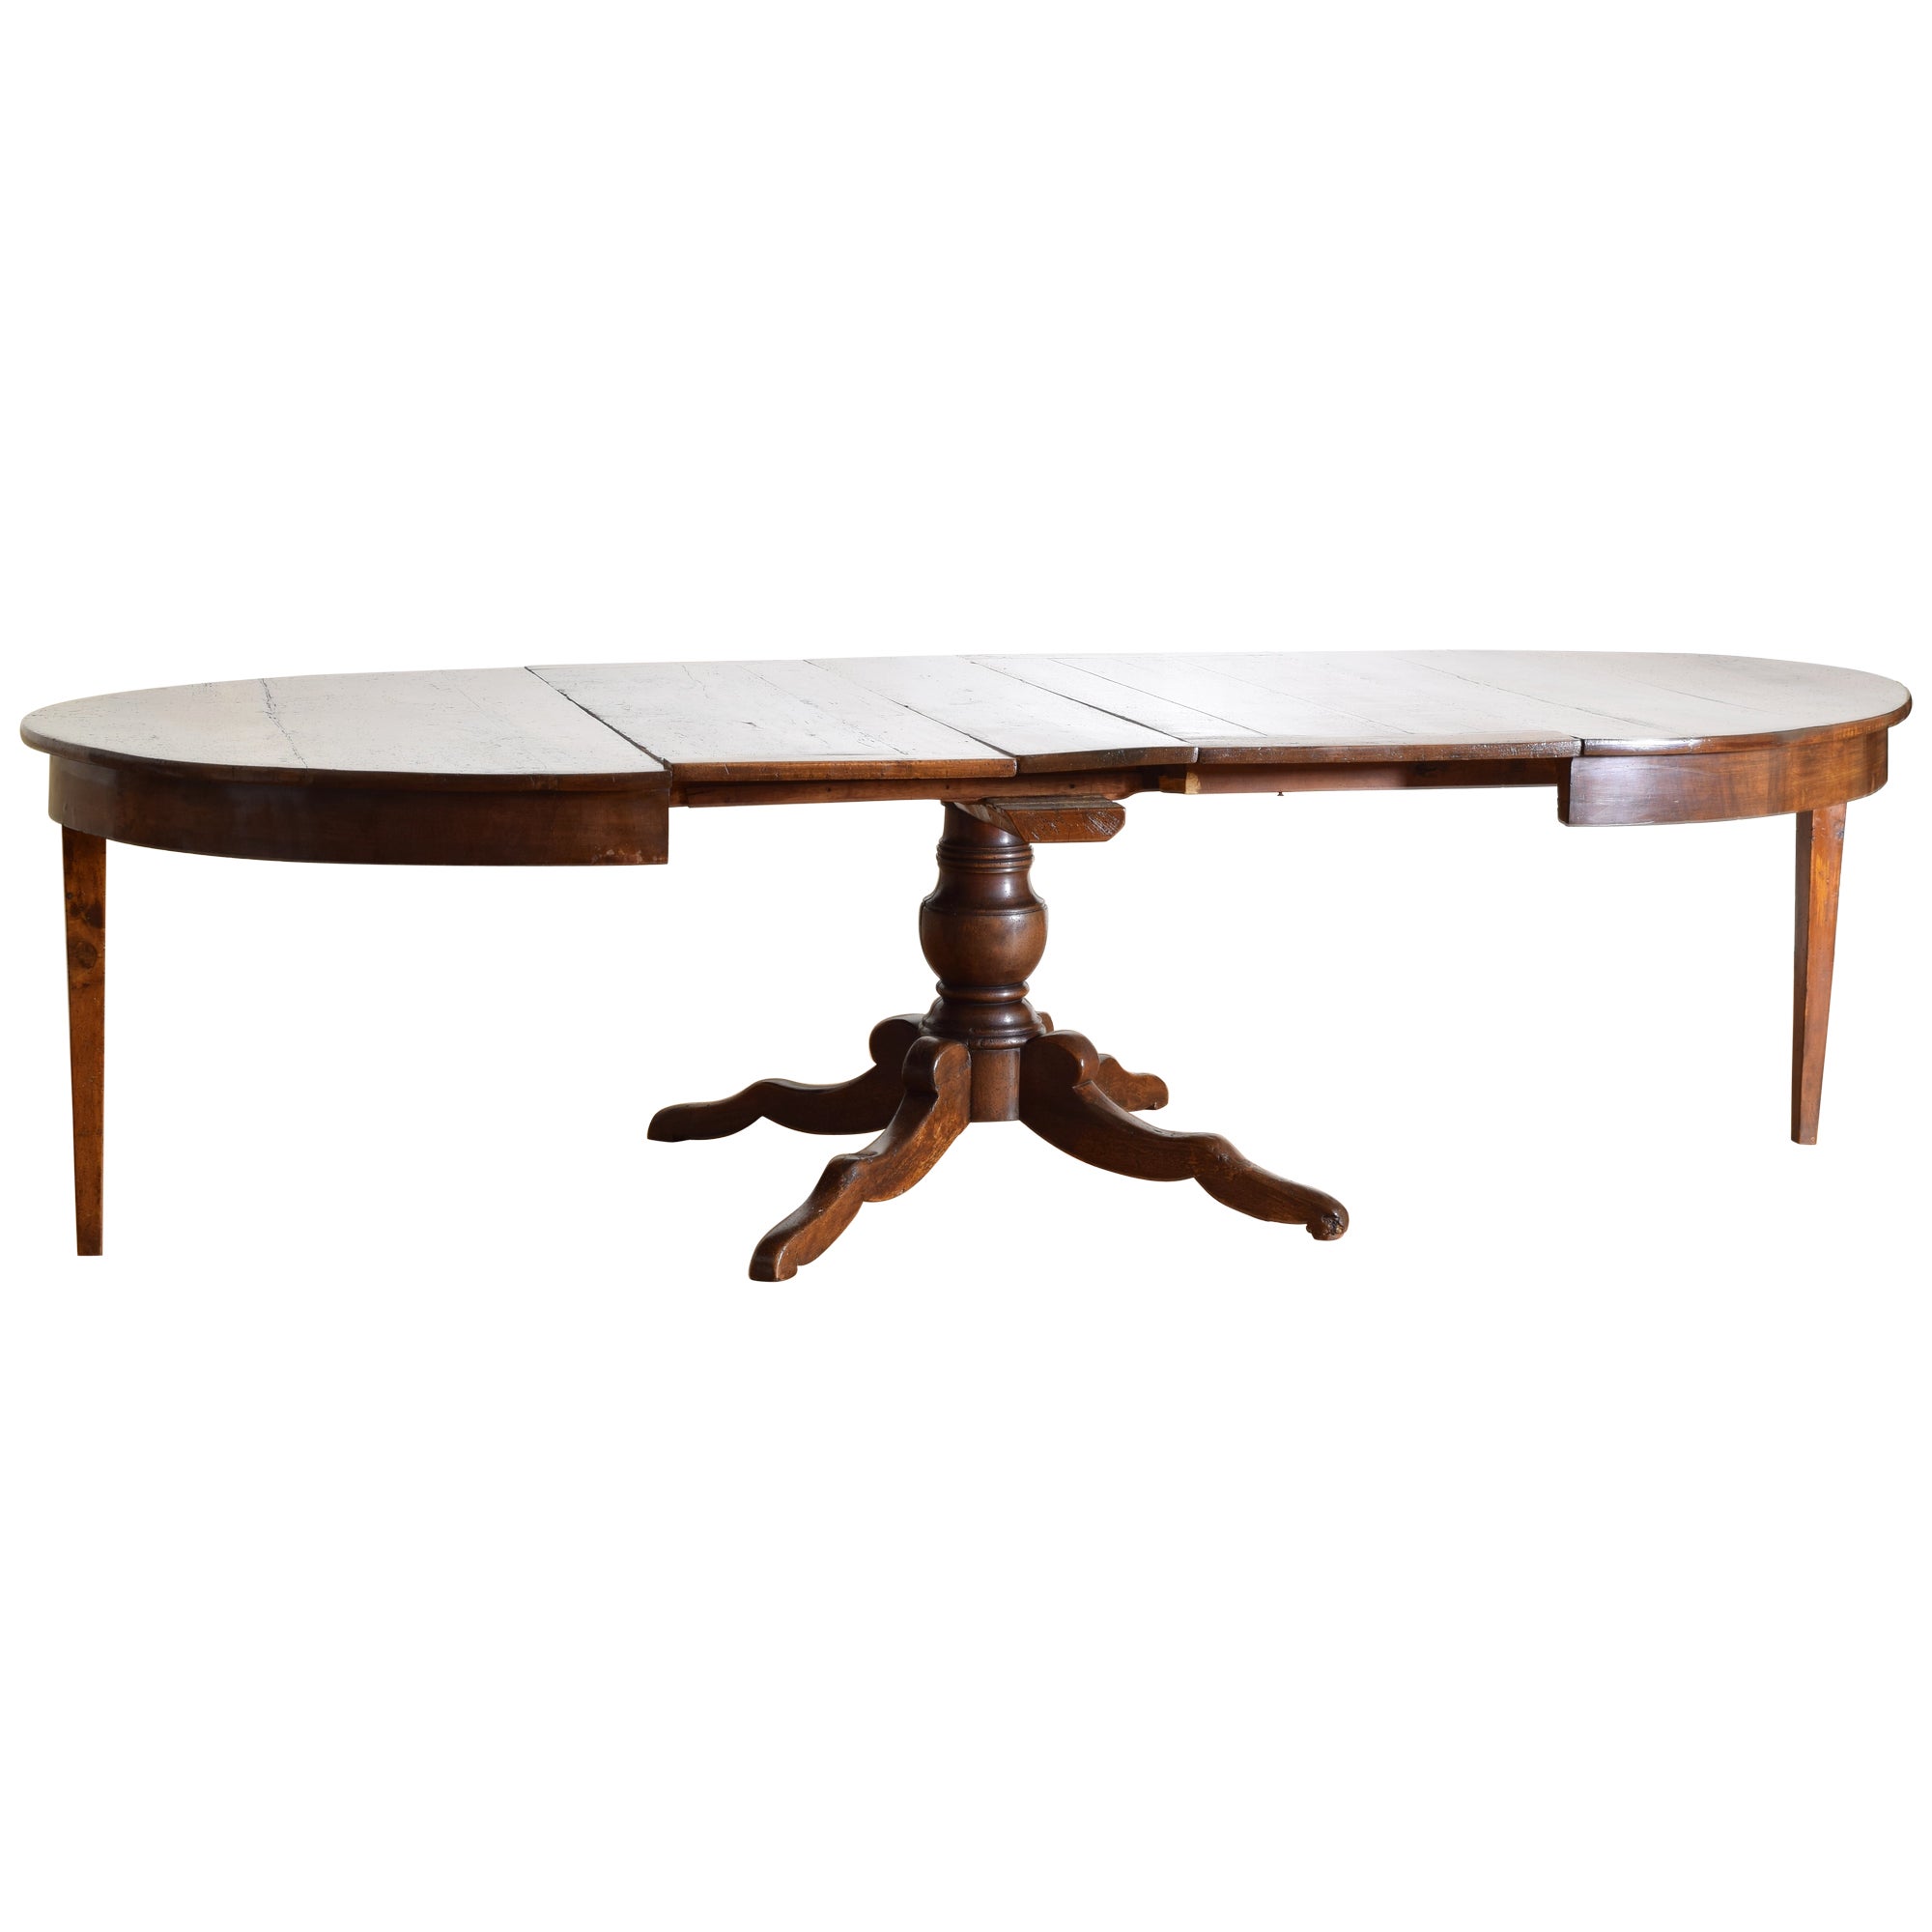 Italian, Tuscany, Neoclassic Solid Walnut Extension Dining Table, ca. 1840